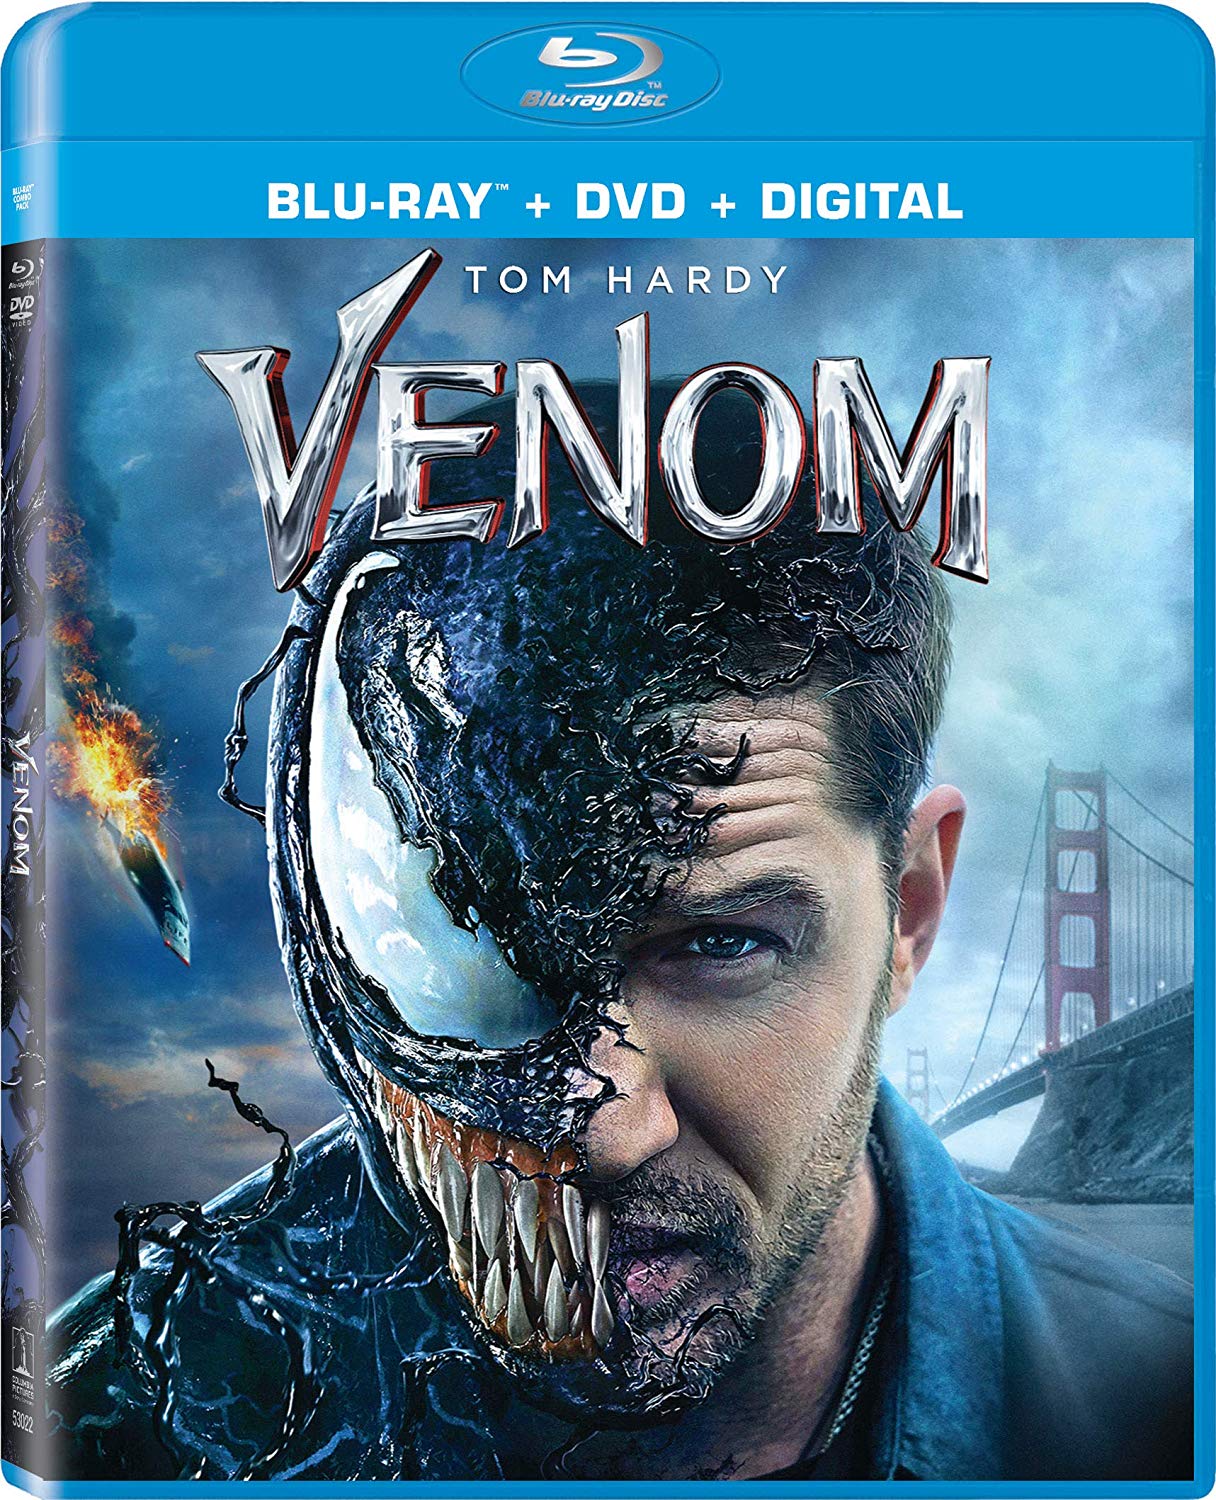 Venom Blu-Ray Combo Pack cover (Sony Pictures Home Entertainment)